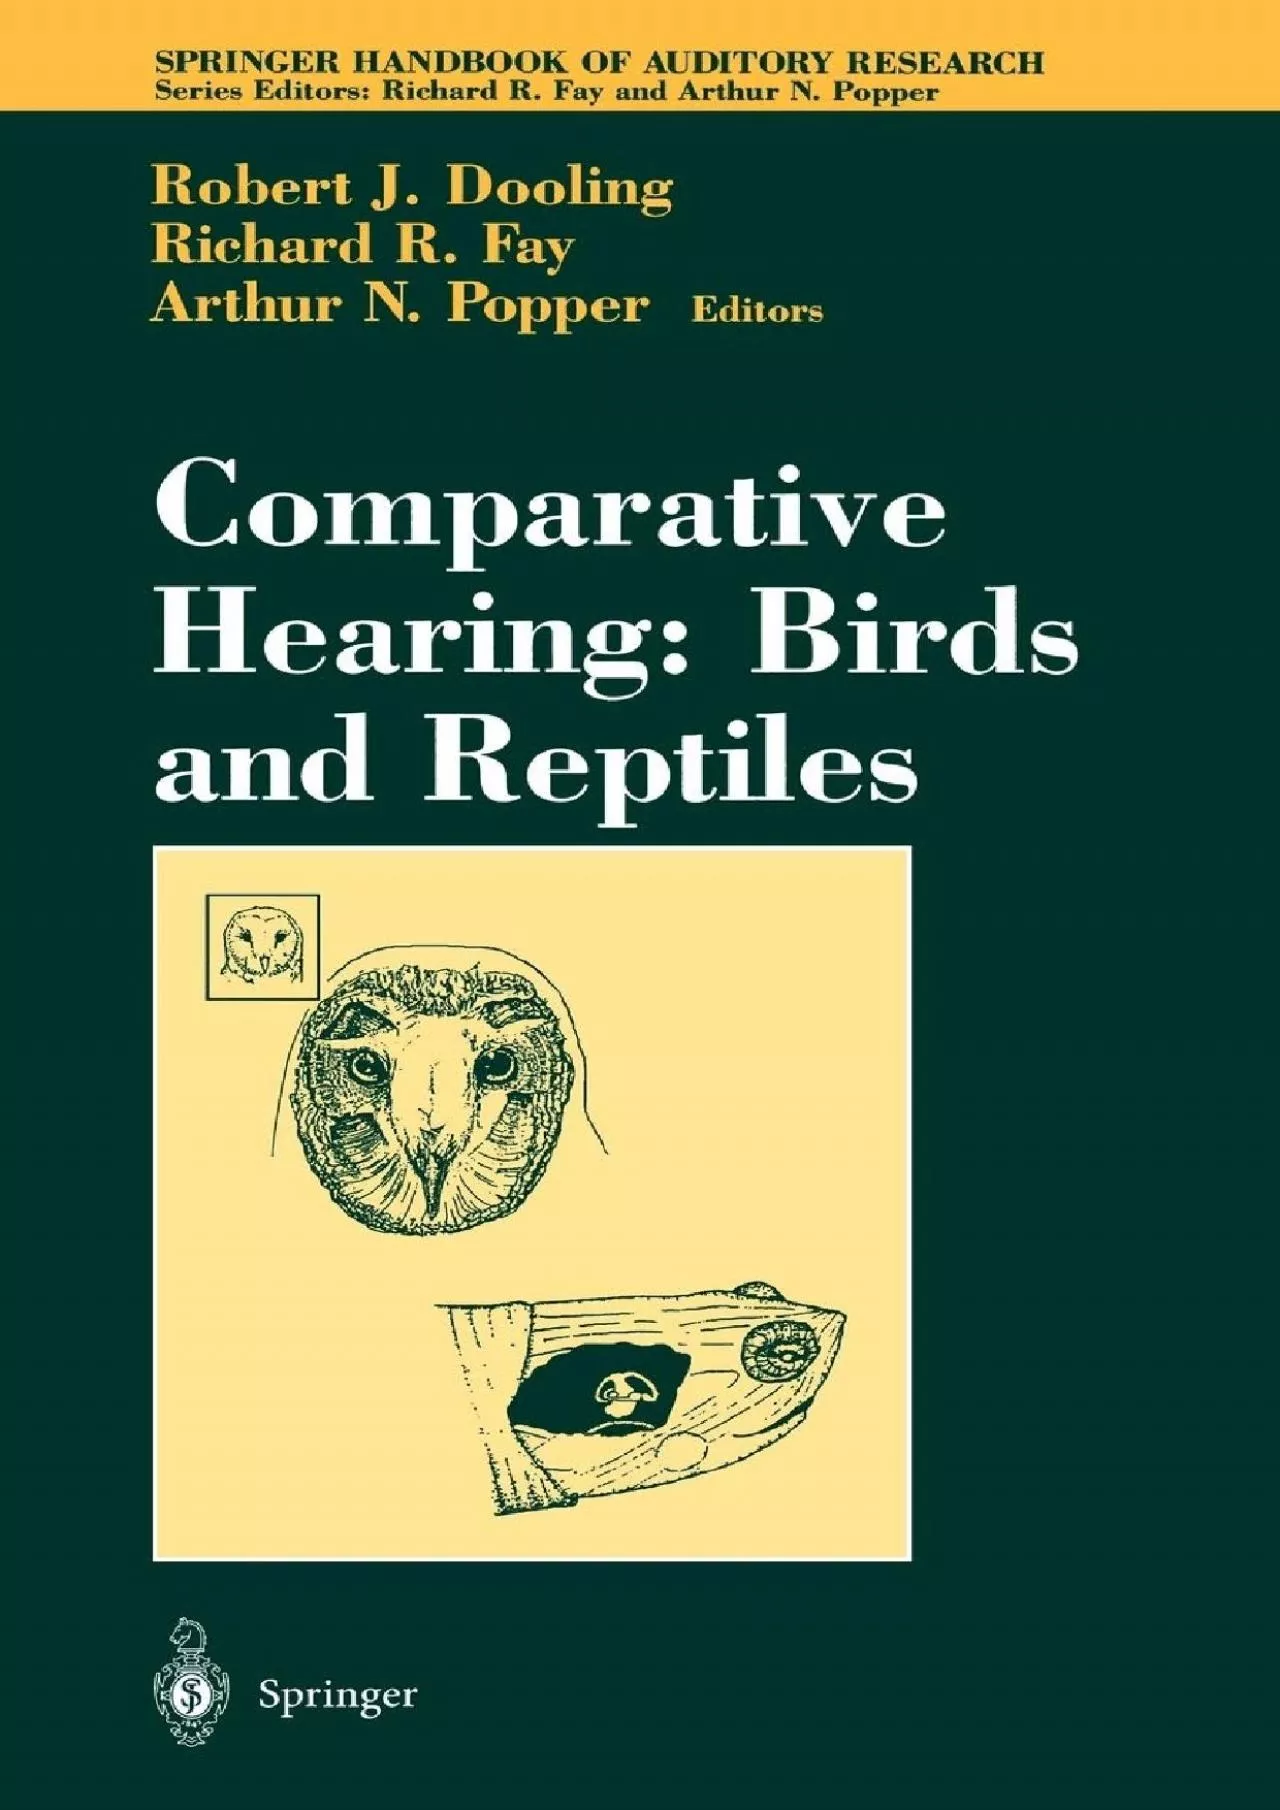 (EBOOK)-Comparative Hearing: Birds and Reptiles (Springer Handbook of Auditory Research,